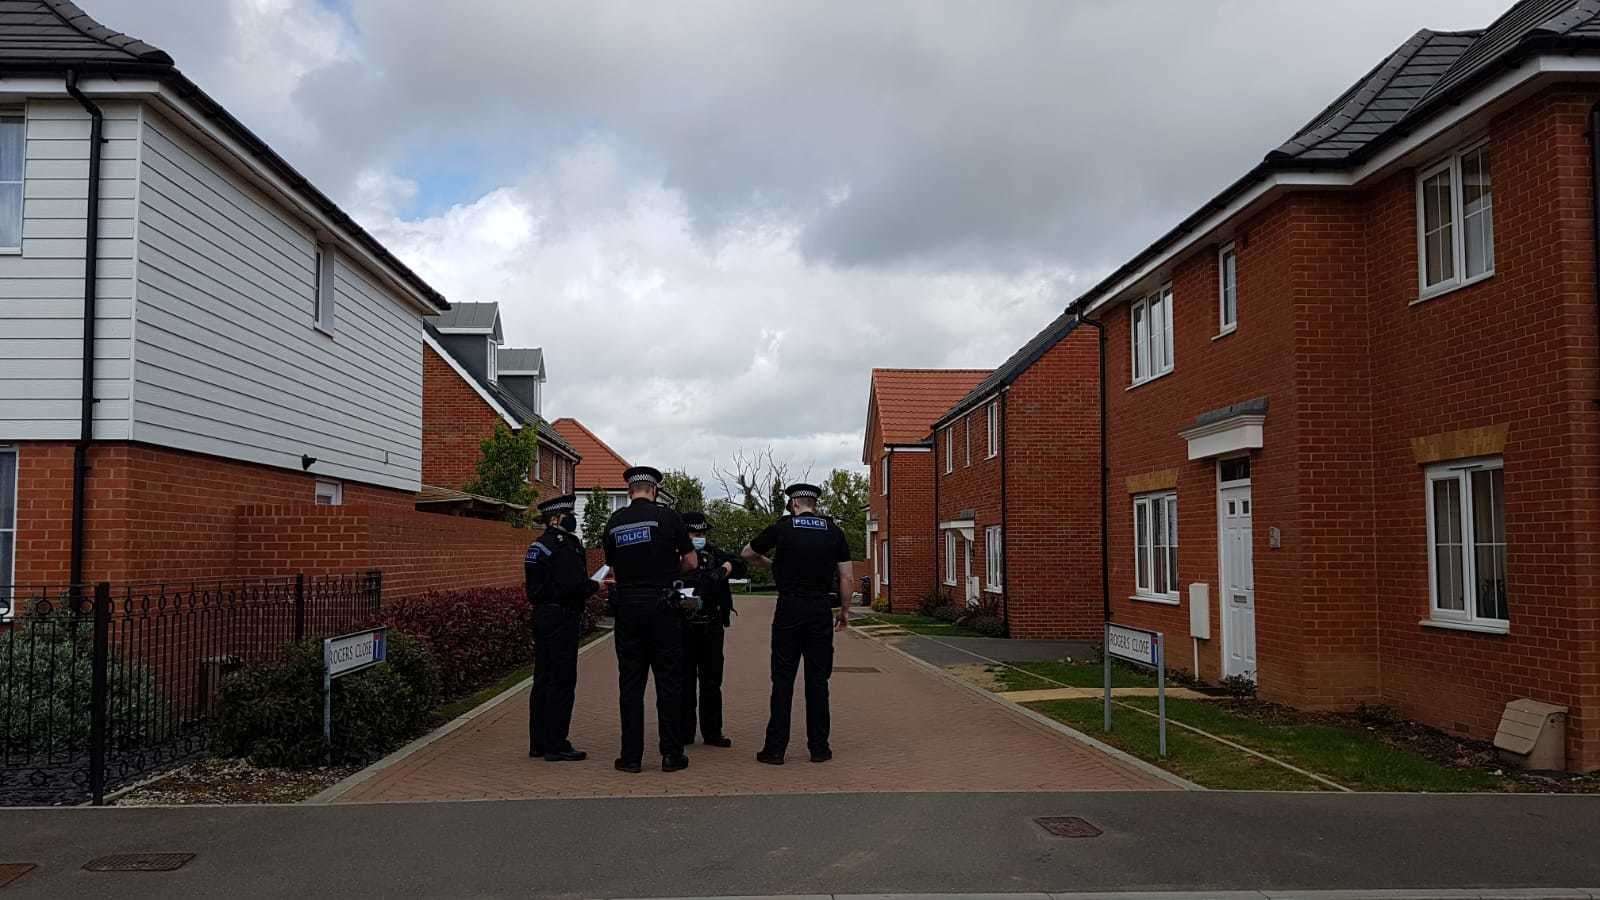 Police officers have been knocking on doors in the area